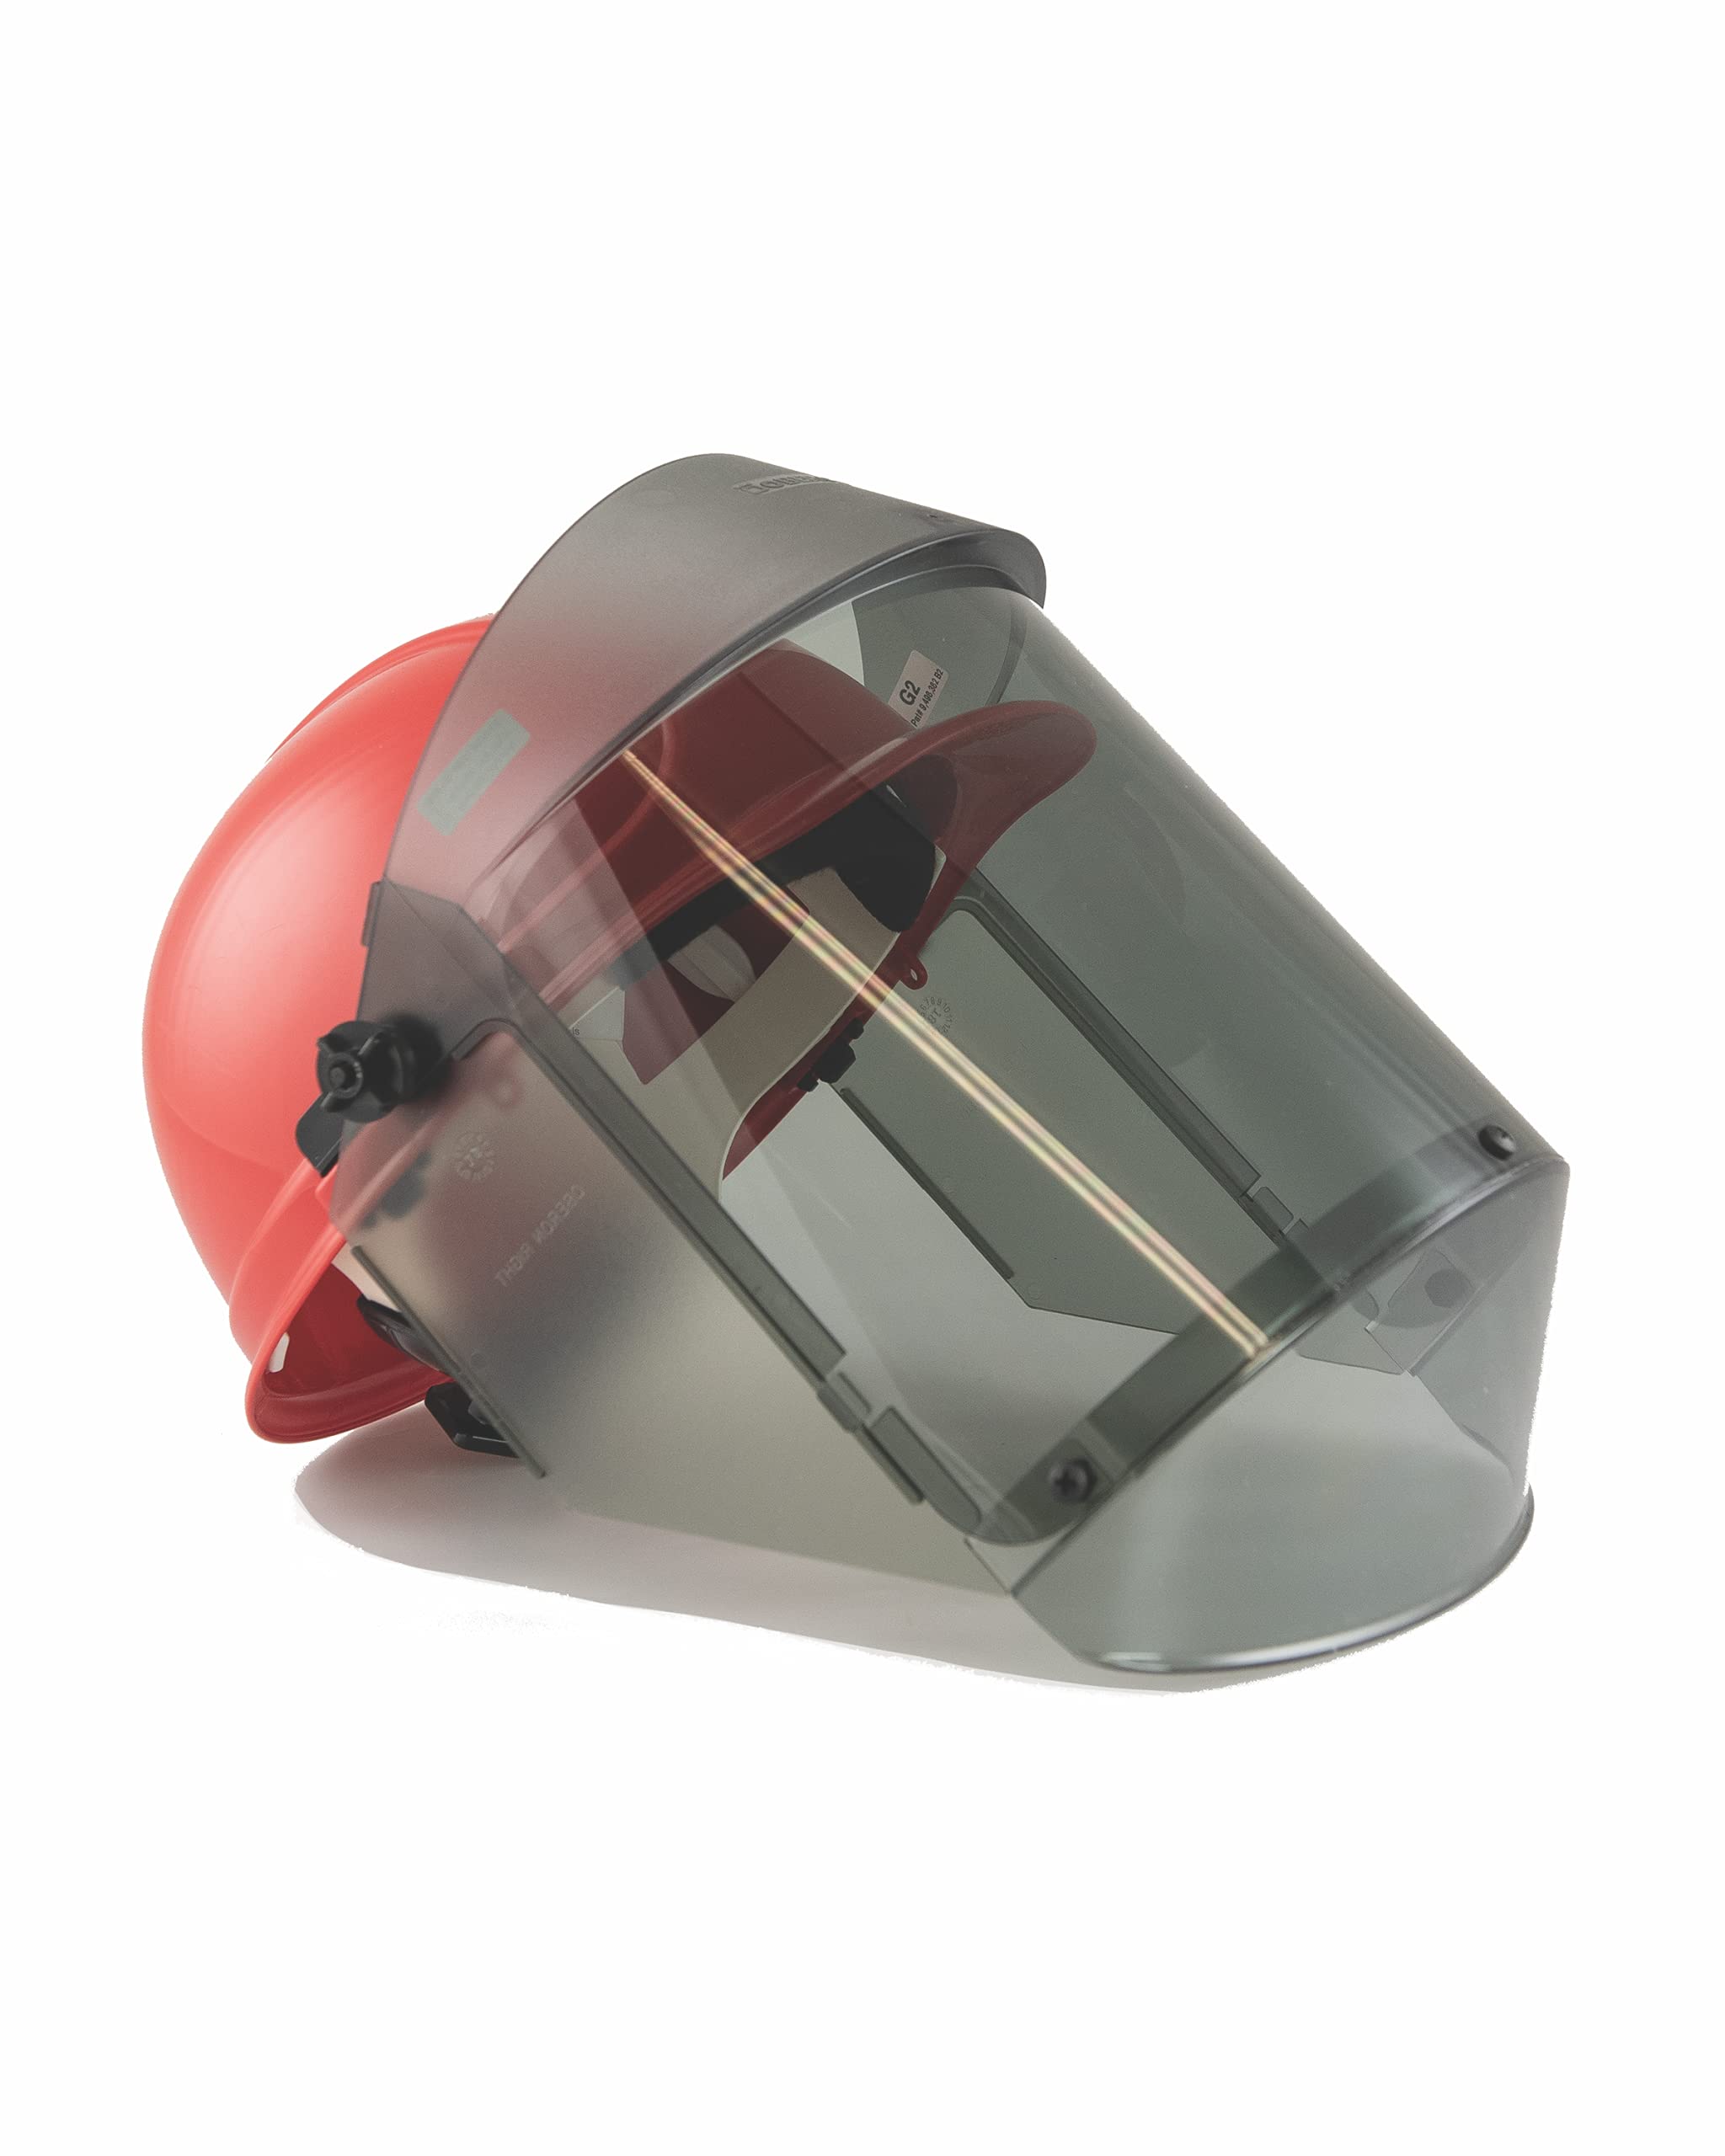 Oberon Company TCG12 Series 12 Cal Arc Flash Face Shield with Anti-Fog & Hard Cap for Electrical Safety and Arc Flash Protection